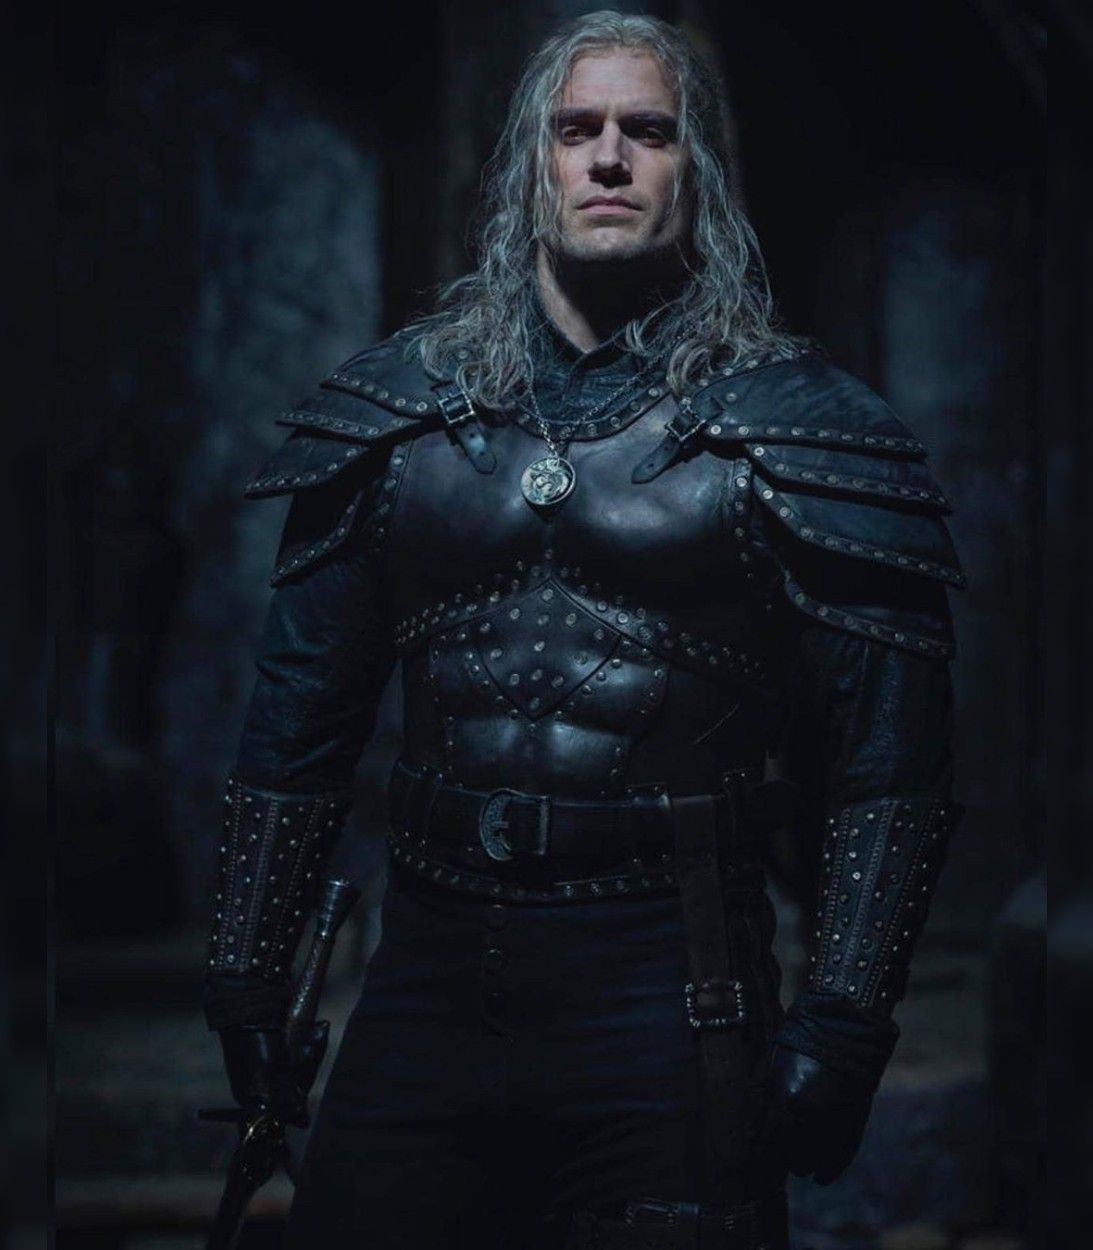 Henry Cavill as Geralt in The Witcher Season 2